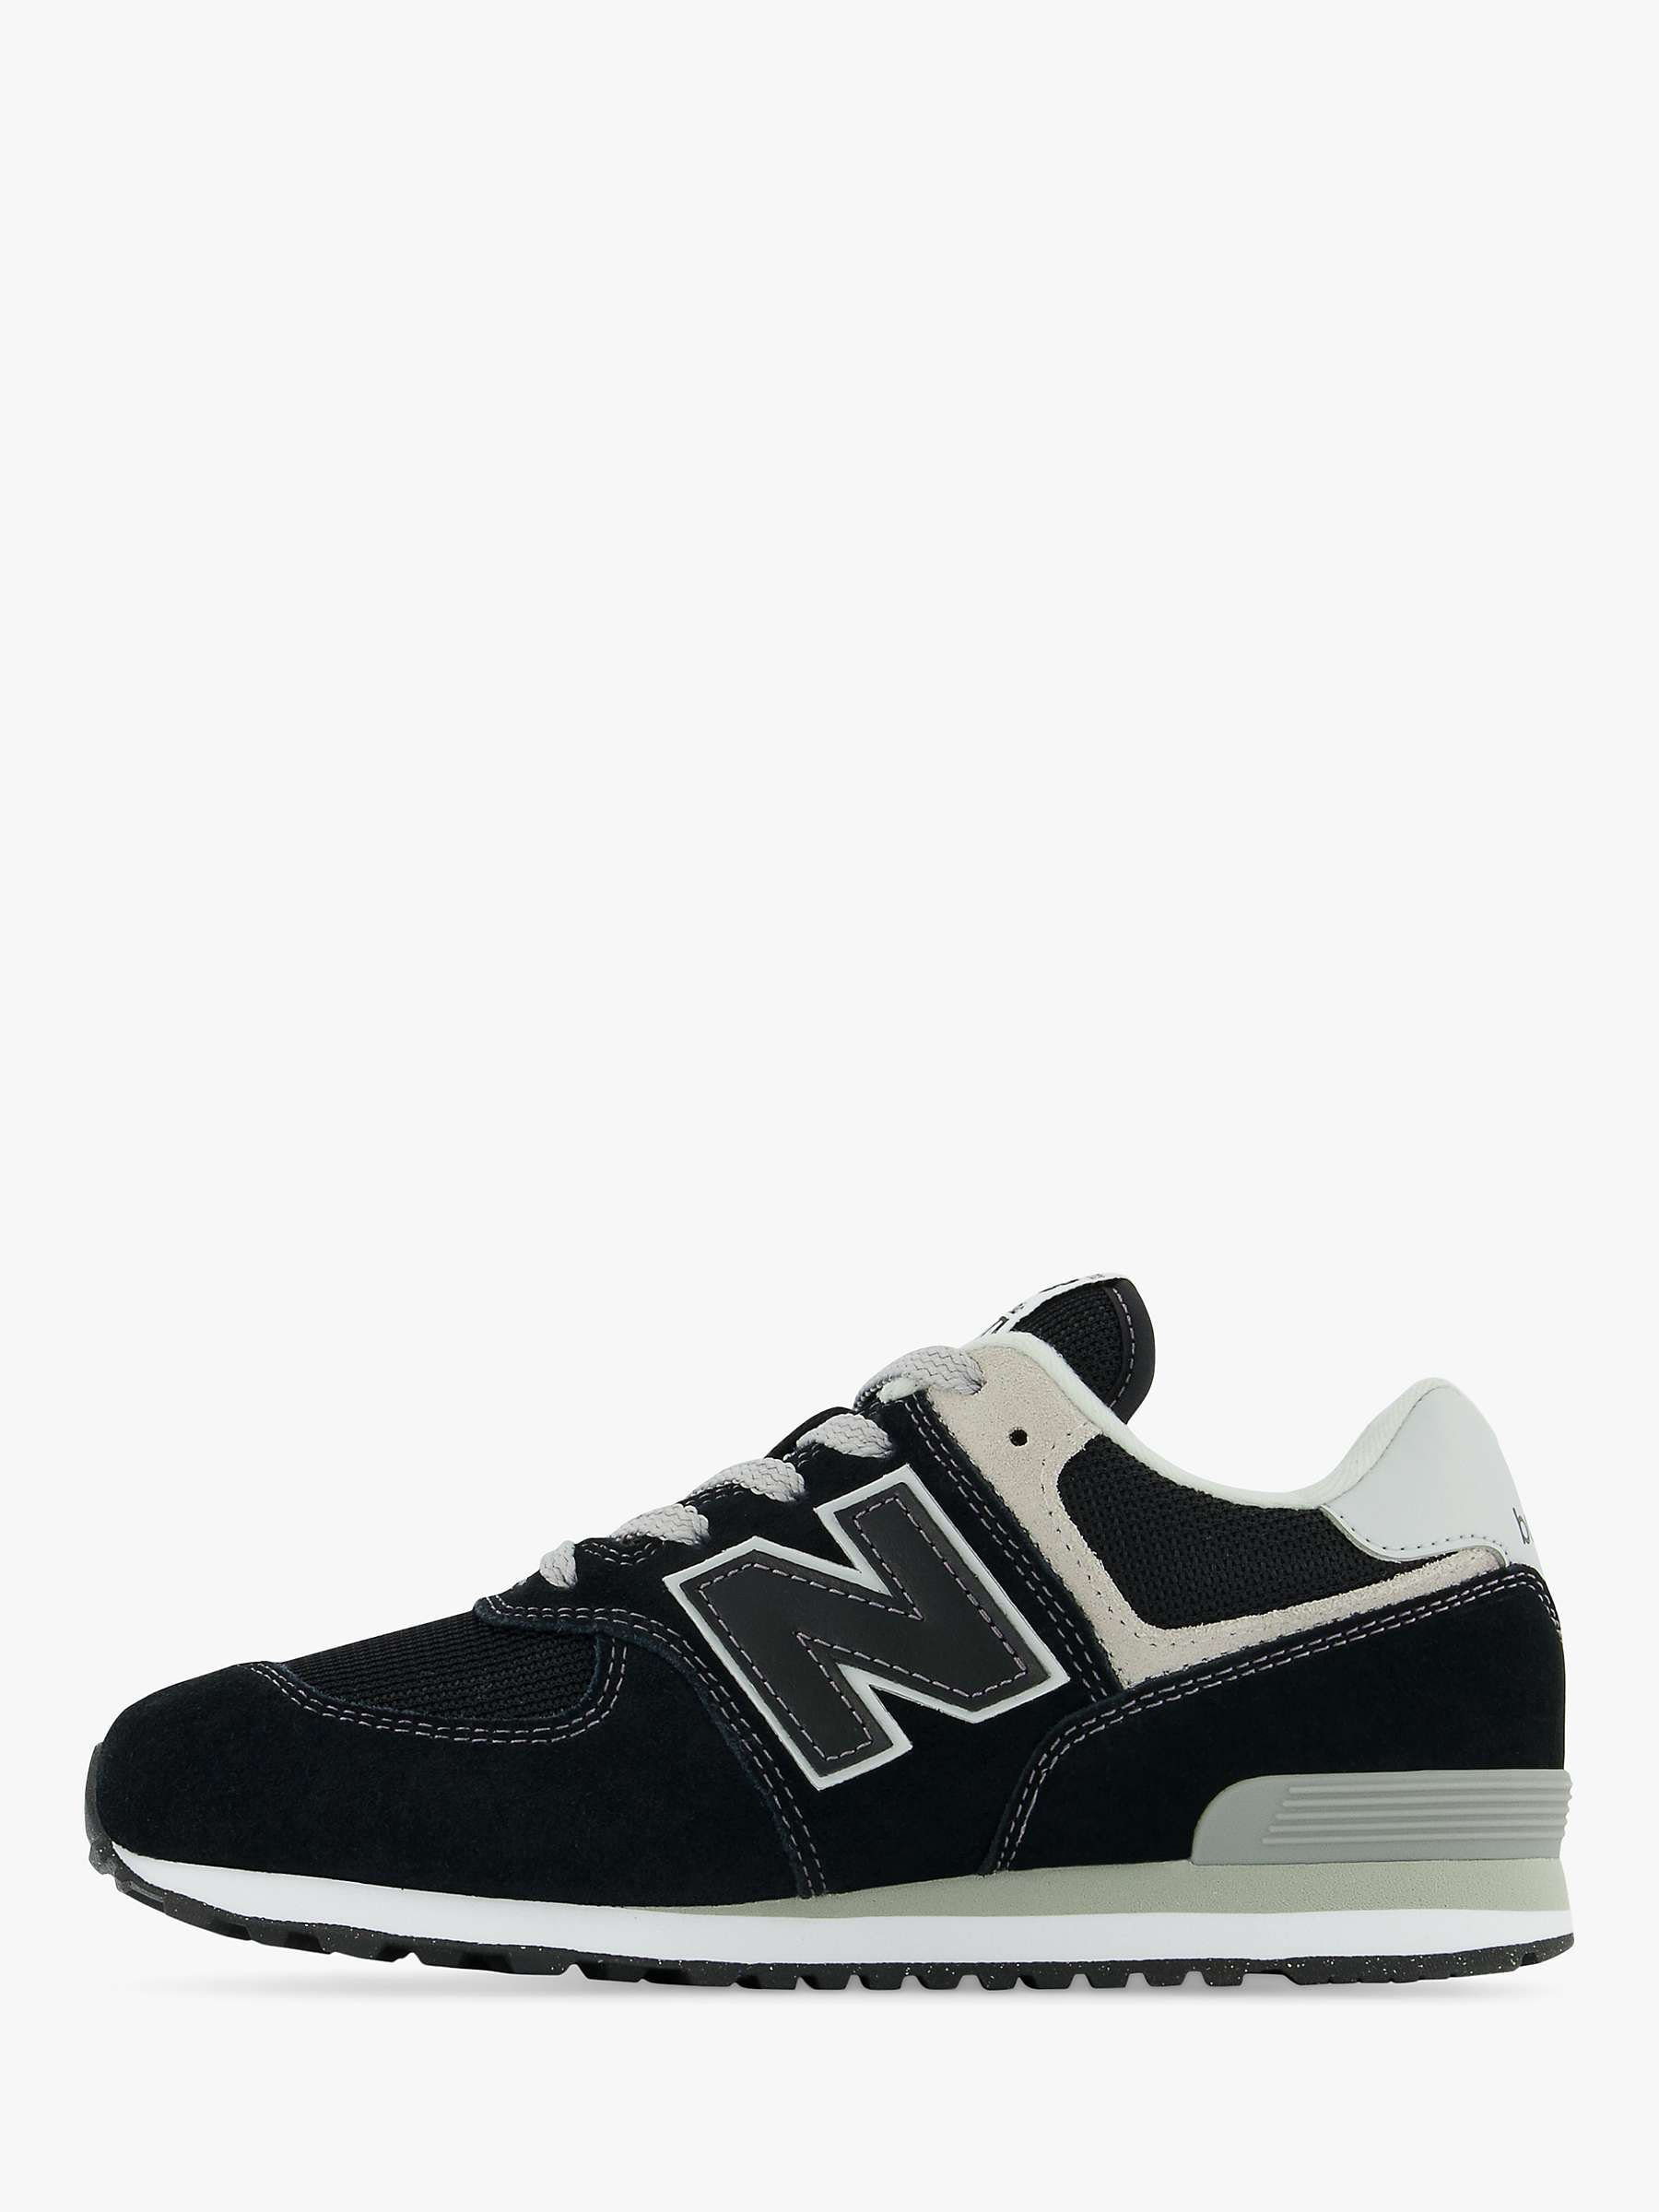 Buy New Balance Kids' 574 Lace Up Trainers, Black Online at johnlewis.com